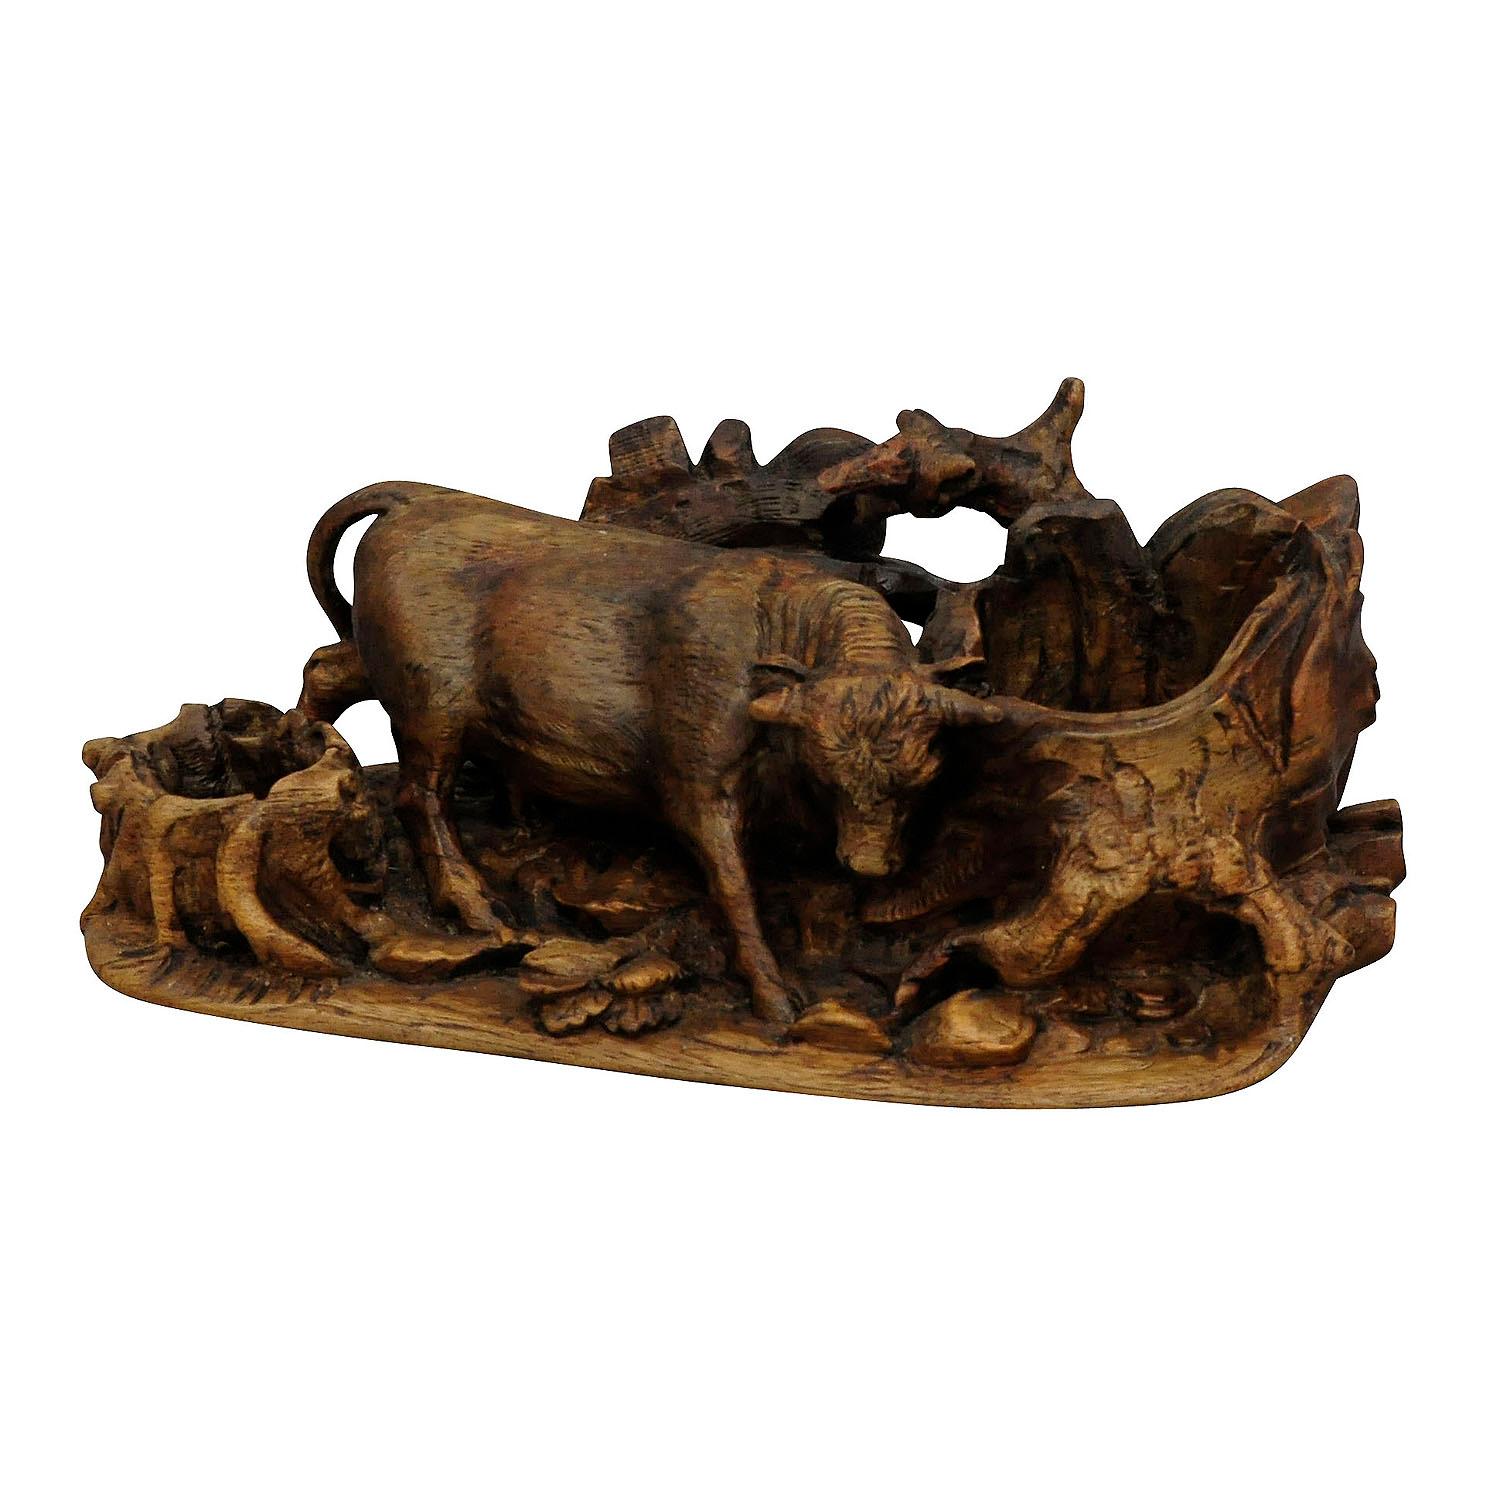 Finely carved statue of a bull ca. 1900

The antique Black Forest carving of a bull which is chafing on a tree stump. It was made most probably in Brienz, Switzerland ca. 1900.

Measures:
Length: 11.02